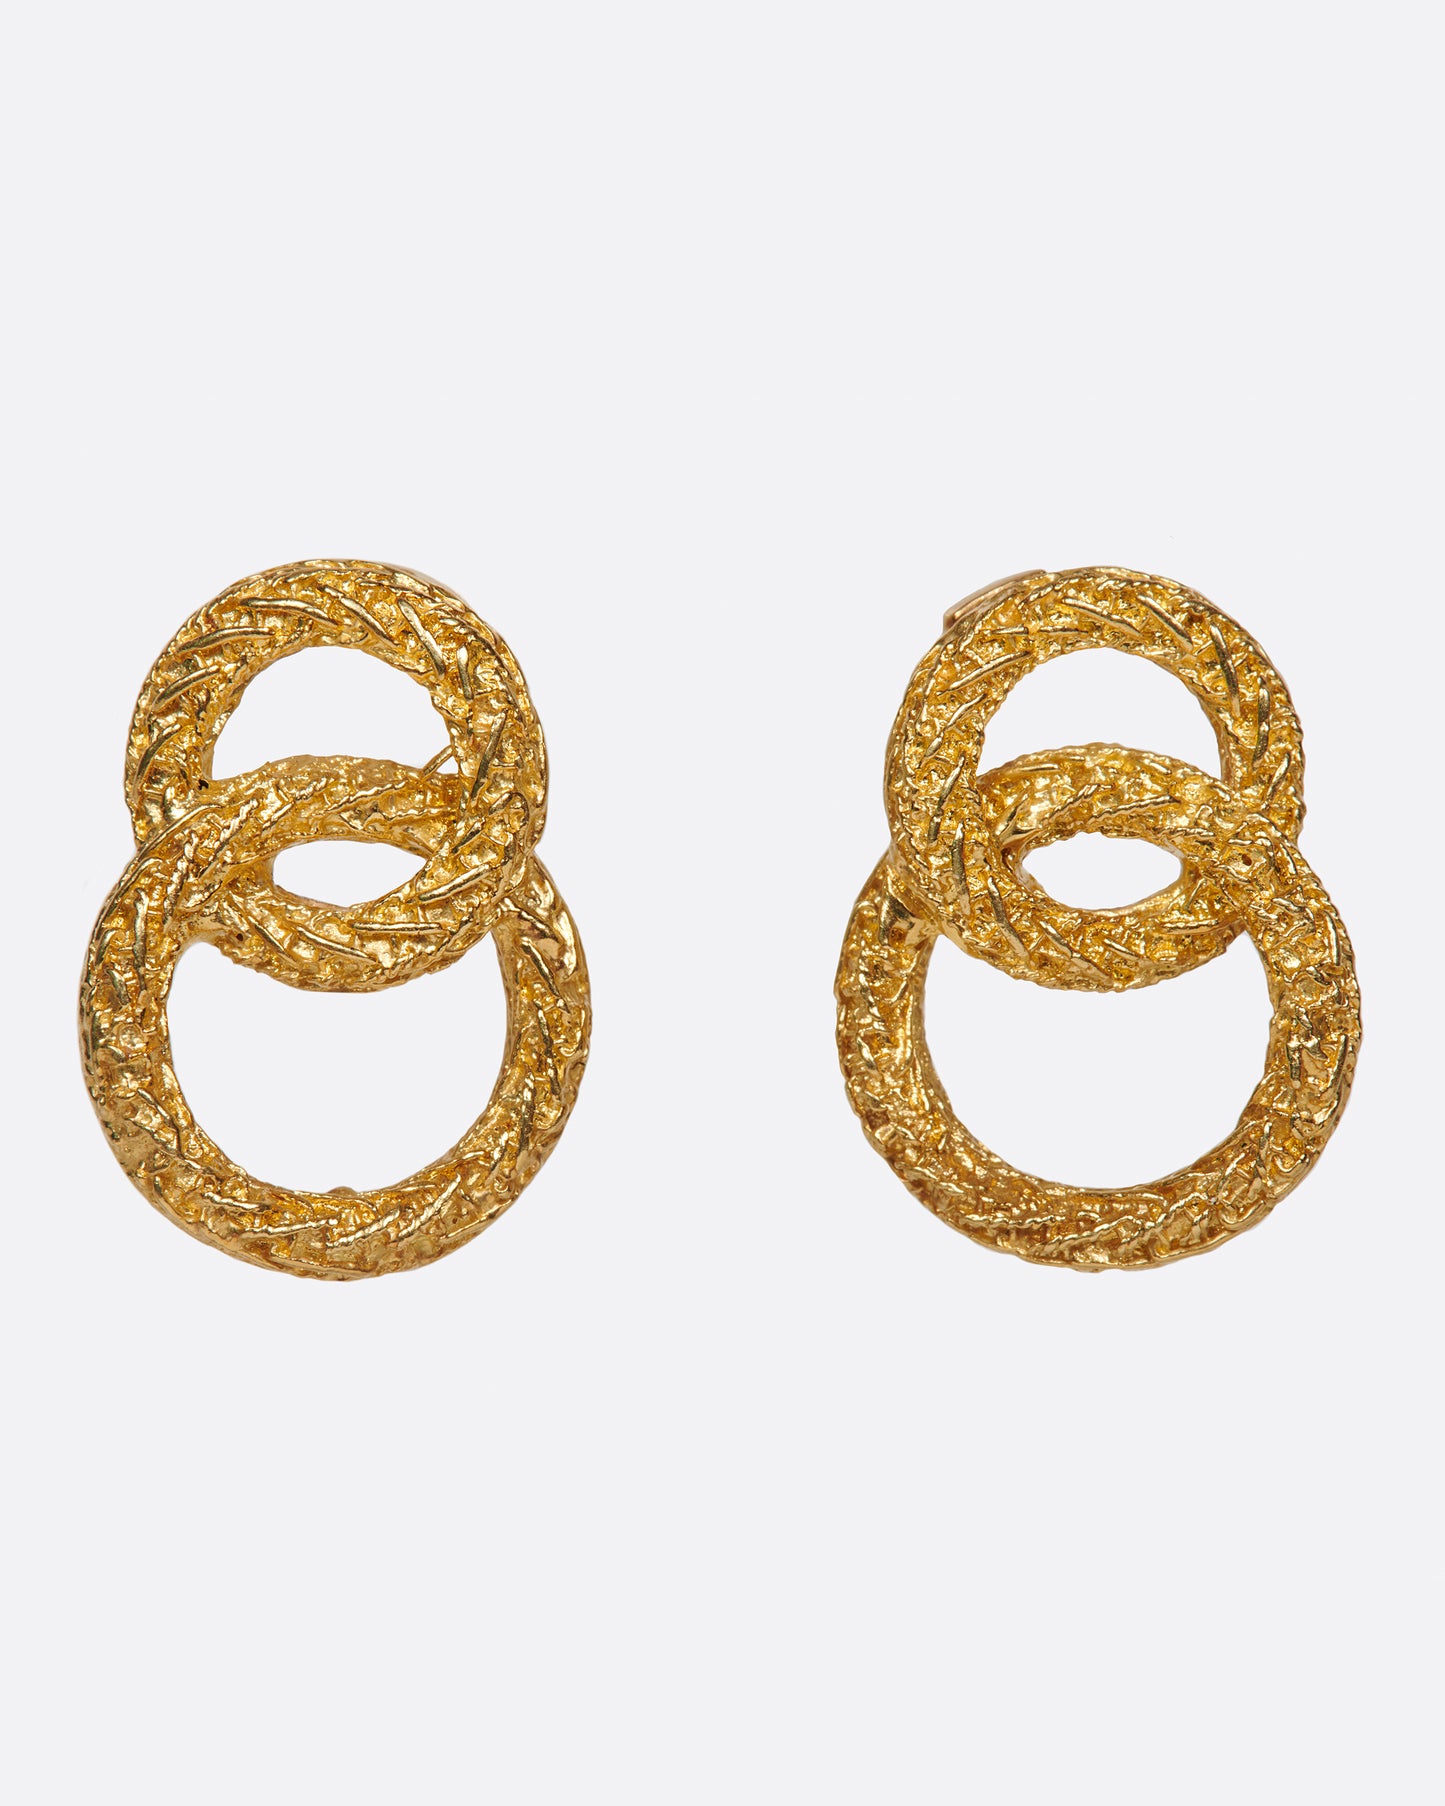 A pair of textured double-circle stud earrings for an impactful look.